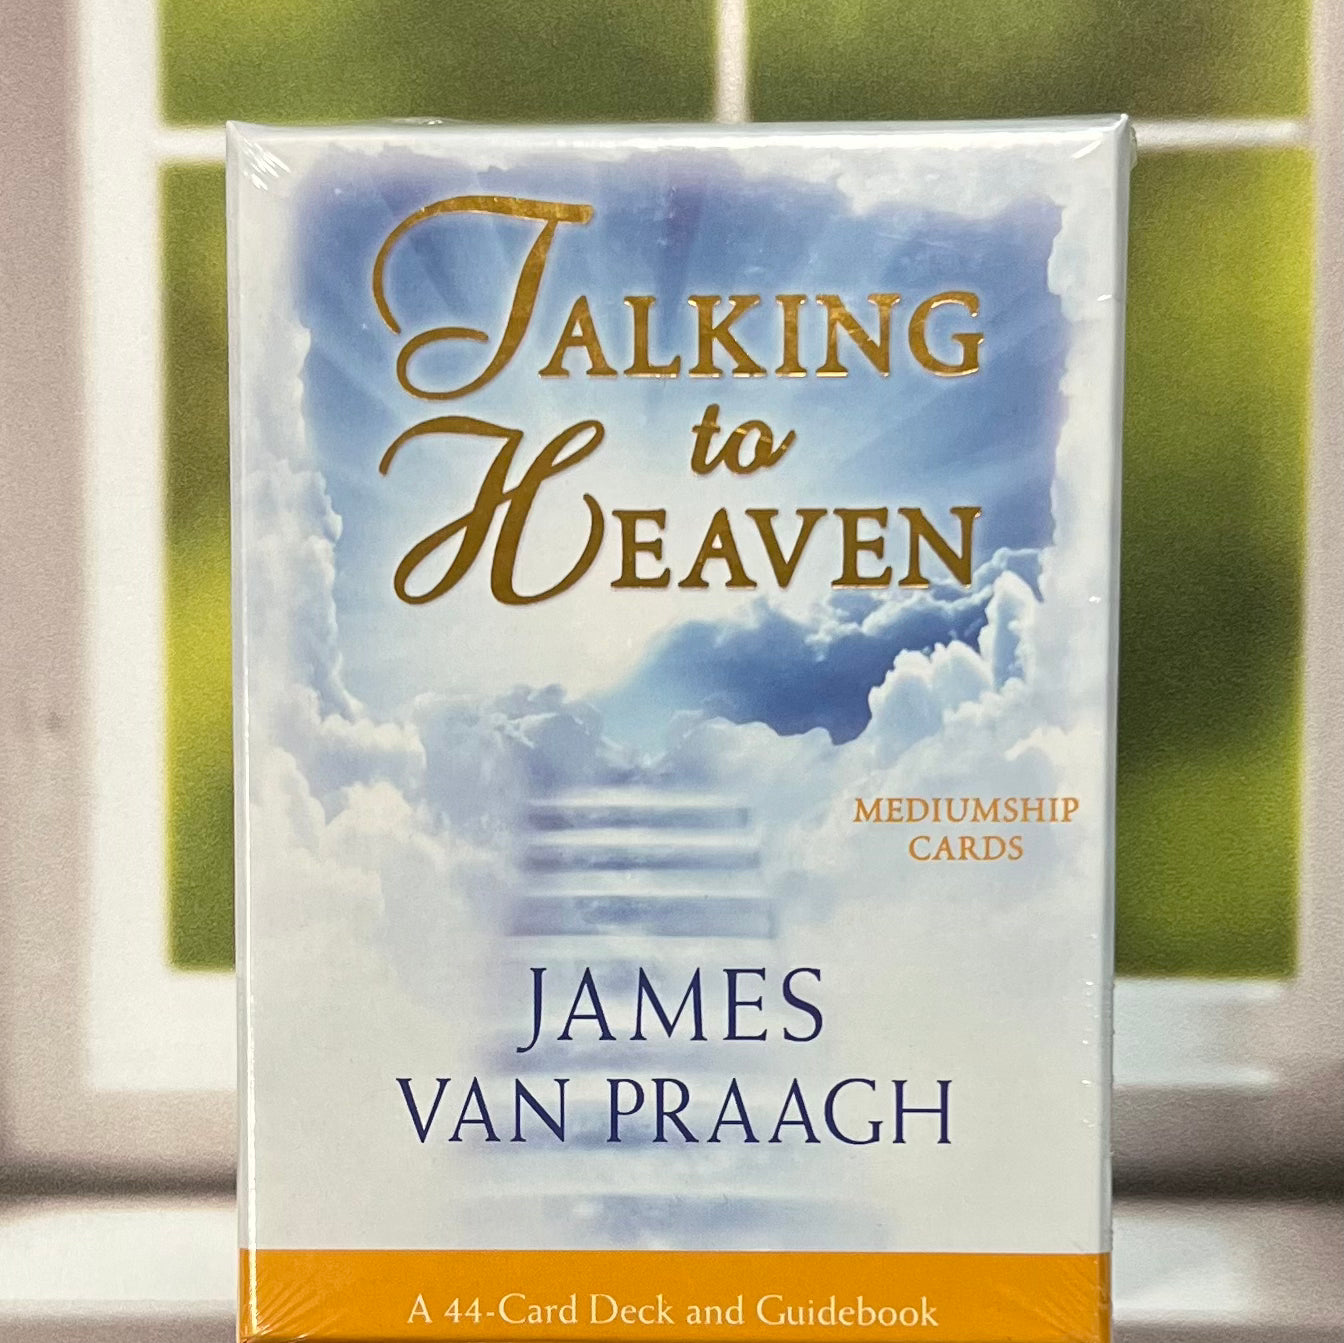 Talking to Heaven Mediumship Cards: A 44-Card Deck and Guidebook by James Van Praagh